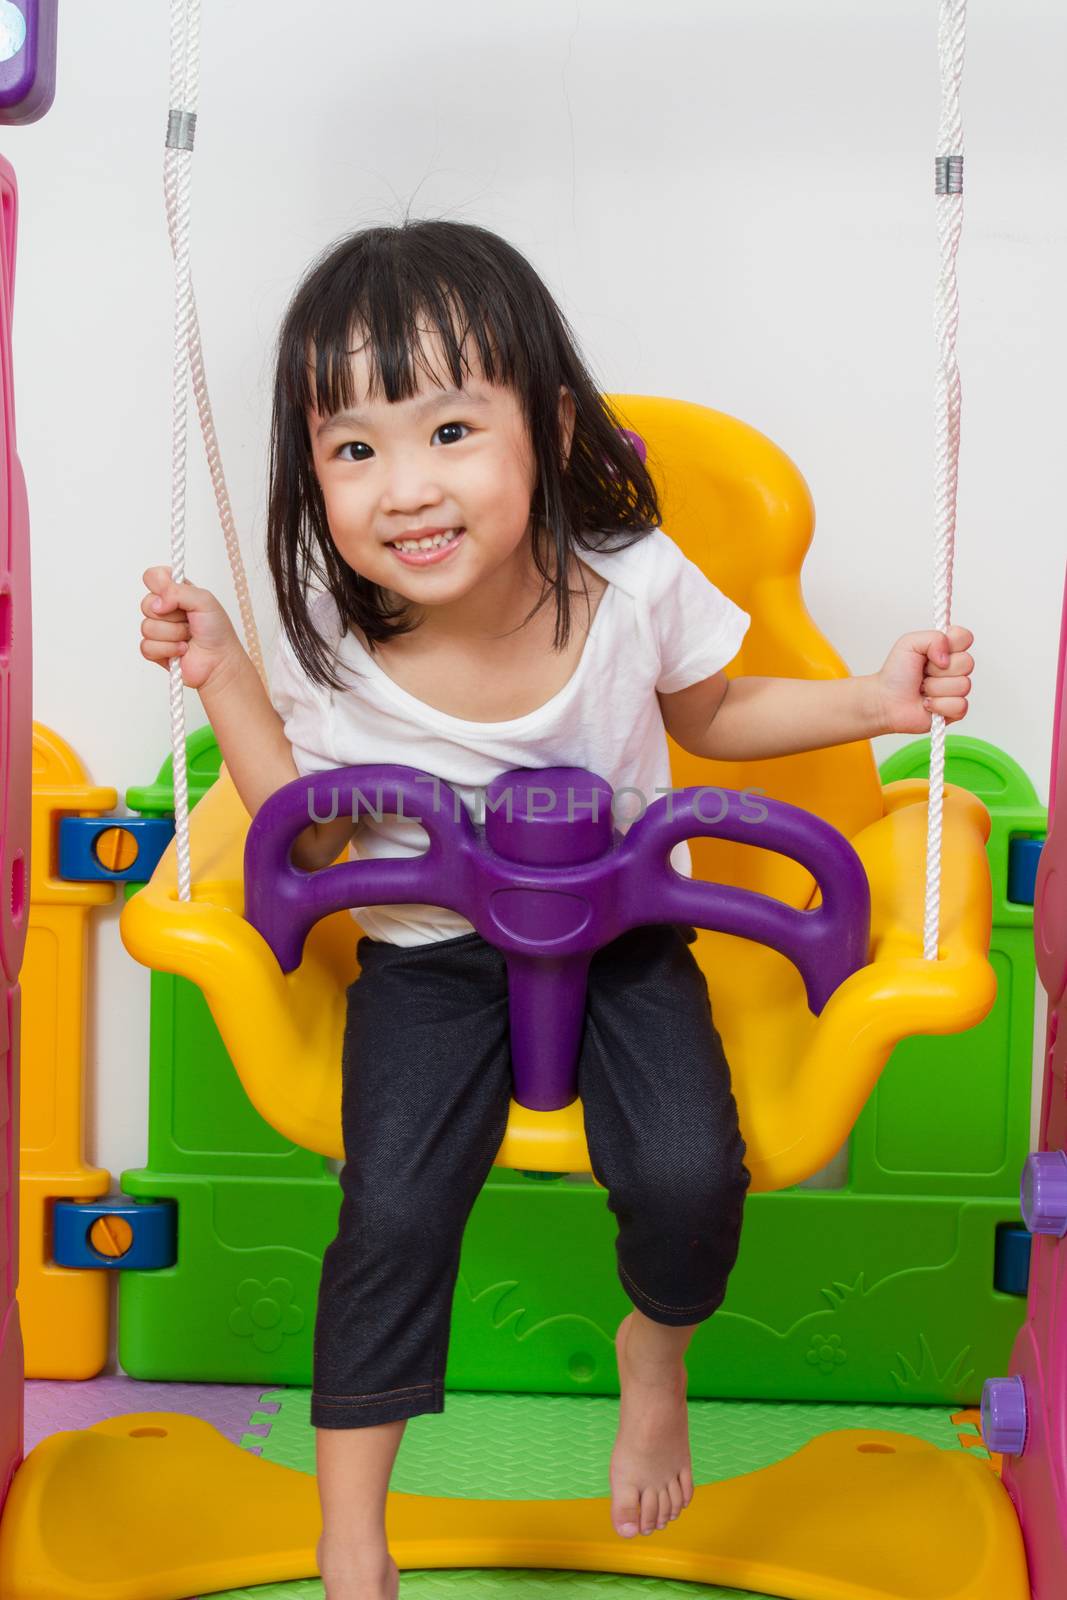 Asian Chinese little girl playing on swing by kiankhoon